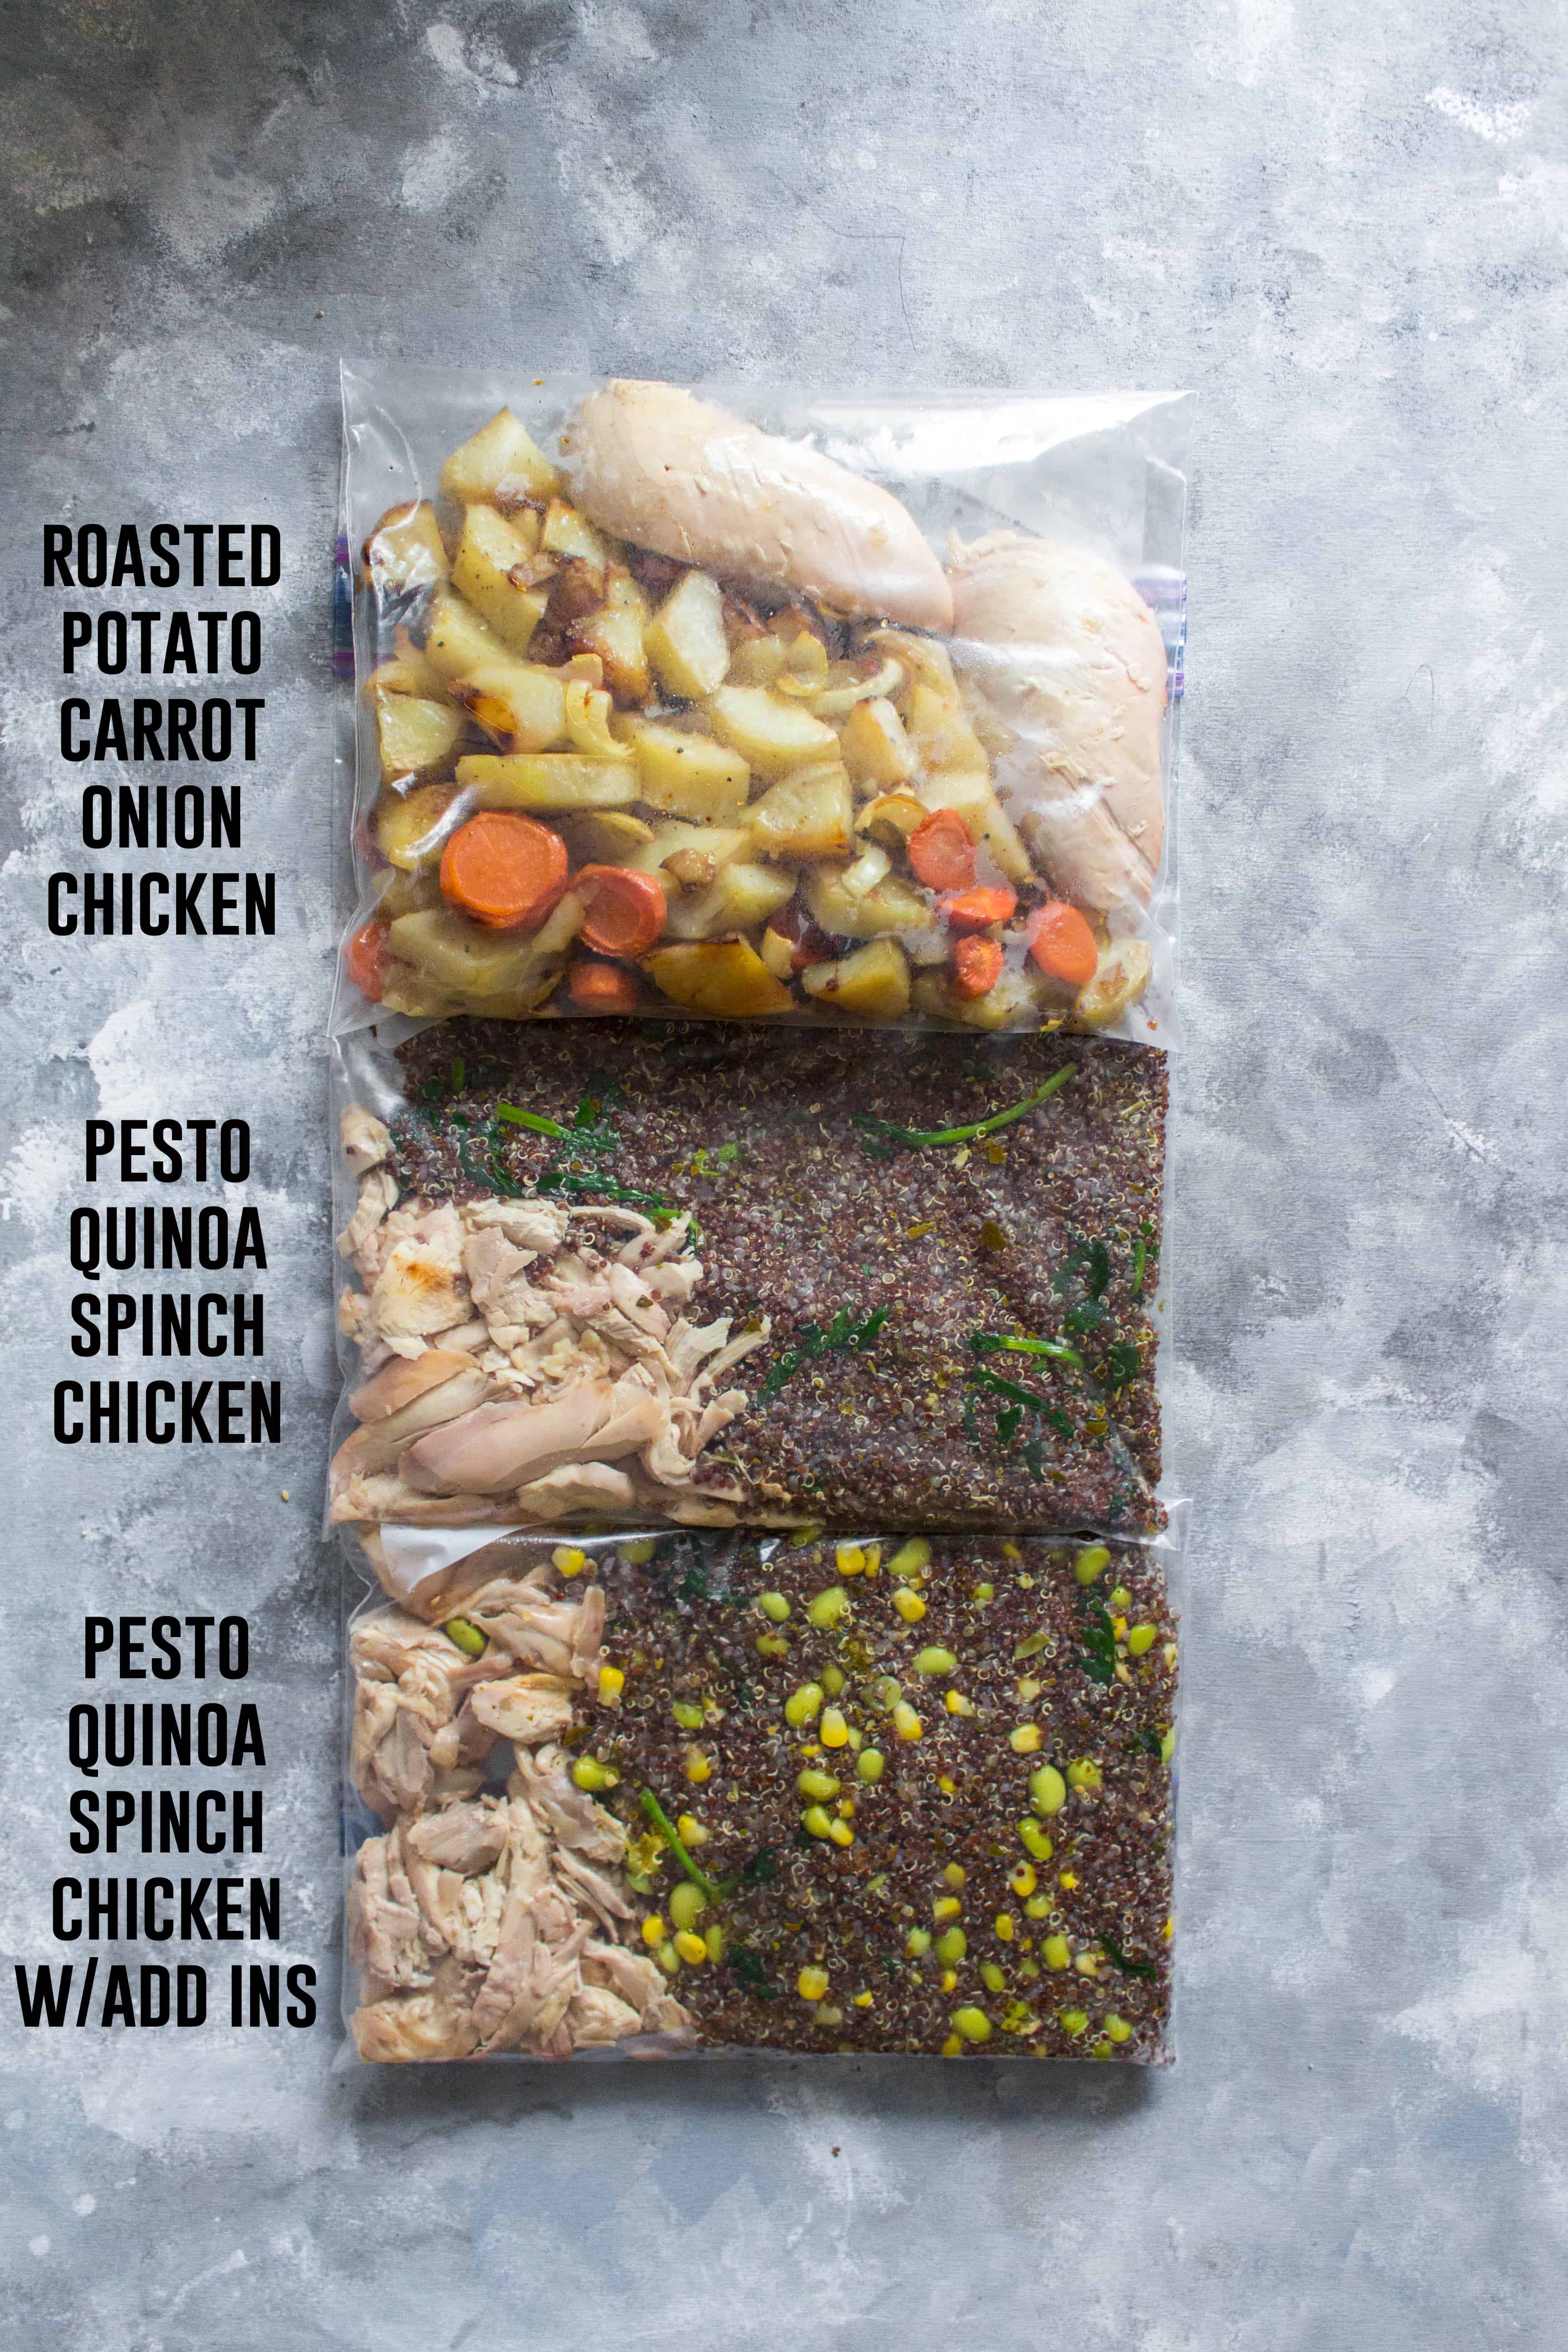 Got a whole chicken? Today I have for you a whole chicken meal prep that makes 3 freezer friendly meals! #mealprep #chickenrecipes #easyrecipe #simplerecipe